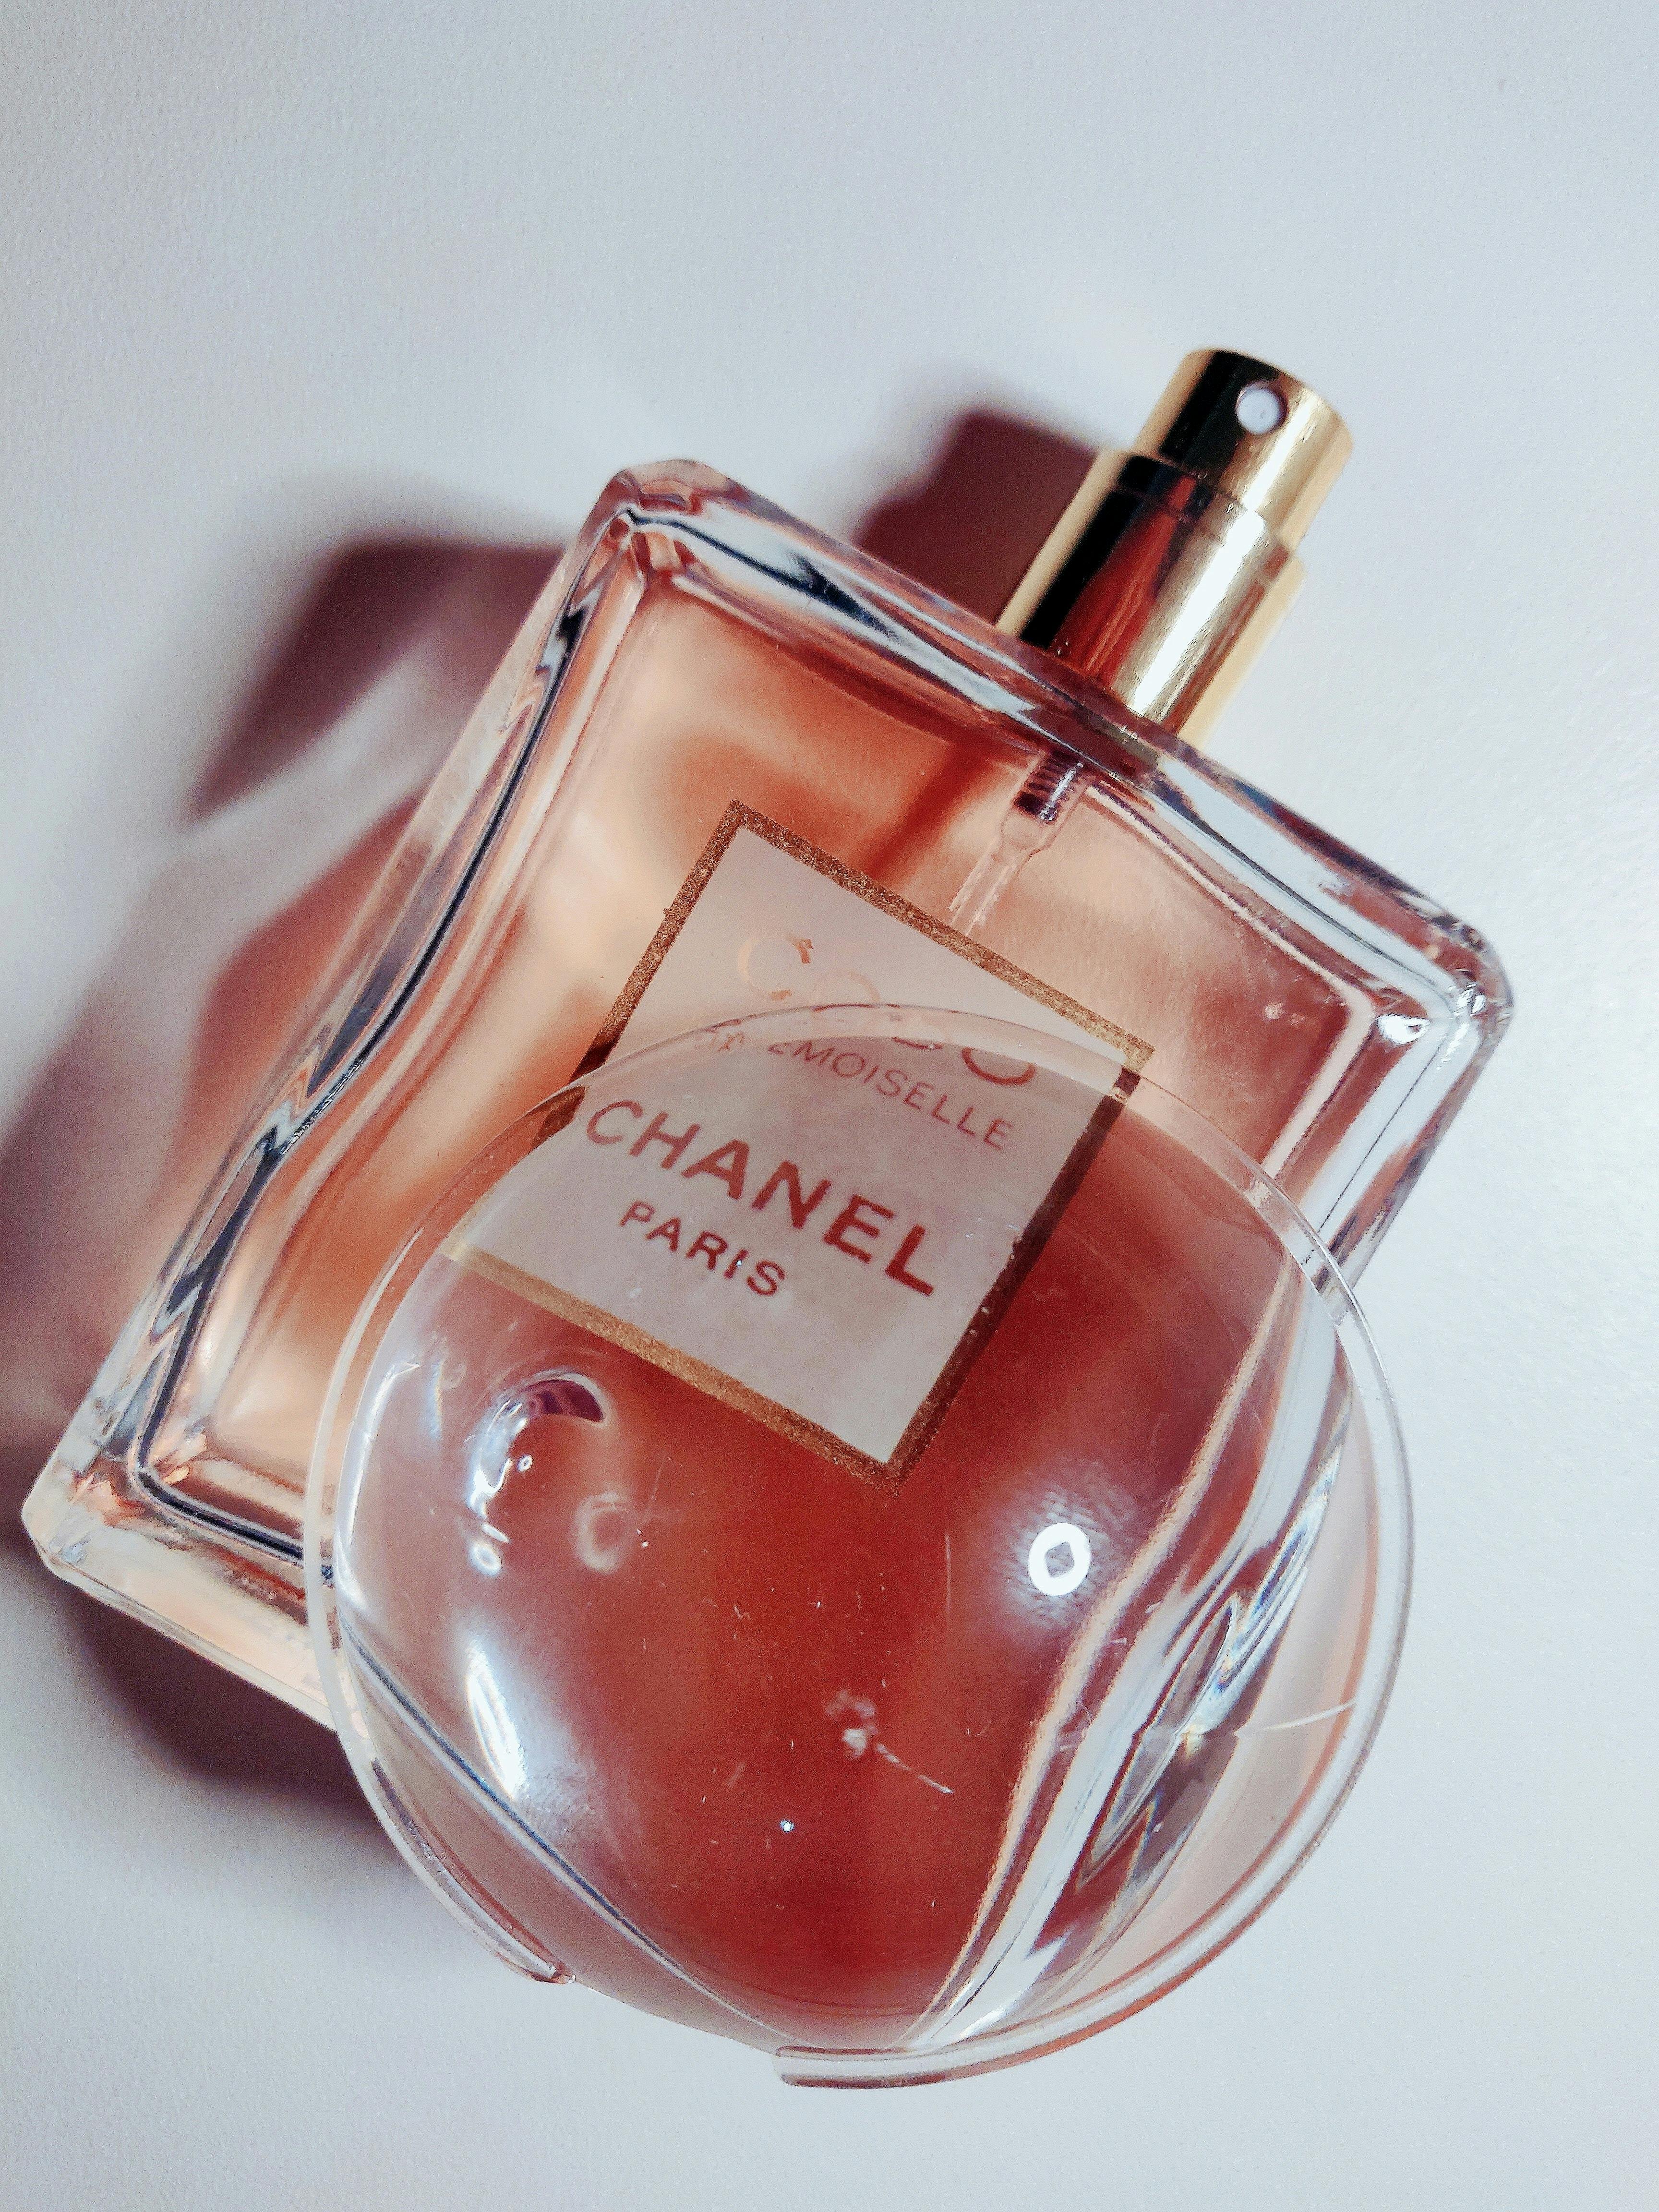 Jeddah Saudi Arabia March 31 2021 COCO chanel Floral scent concept. Perfume  bottle with lflowers over pink pastel background Flat lay and copy space  top view. Stock Photo